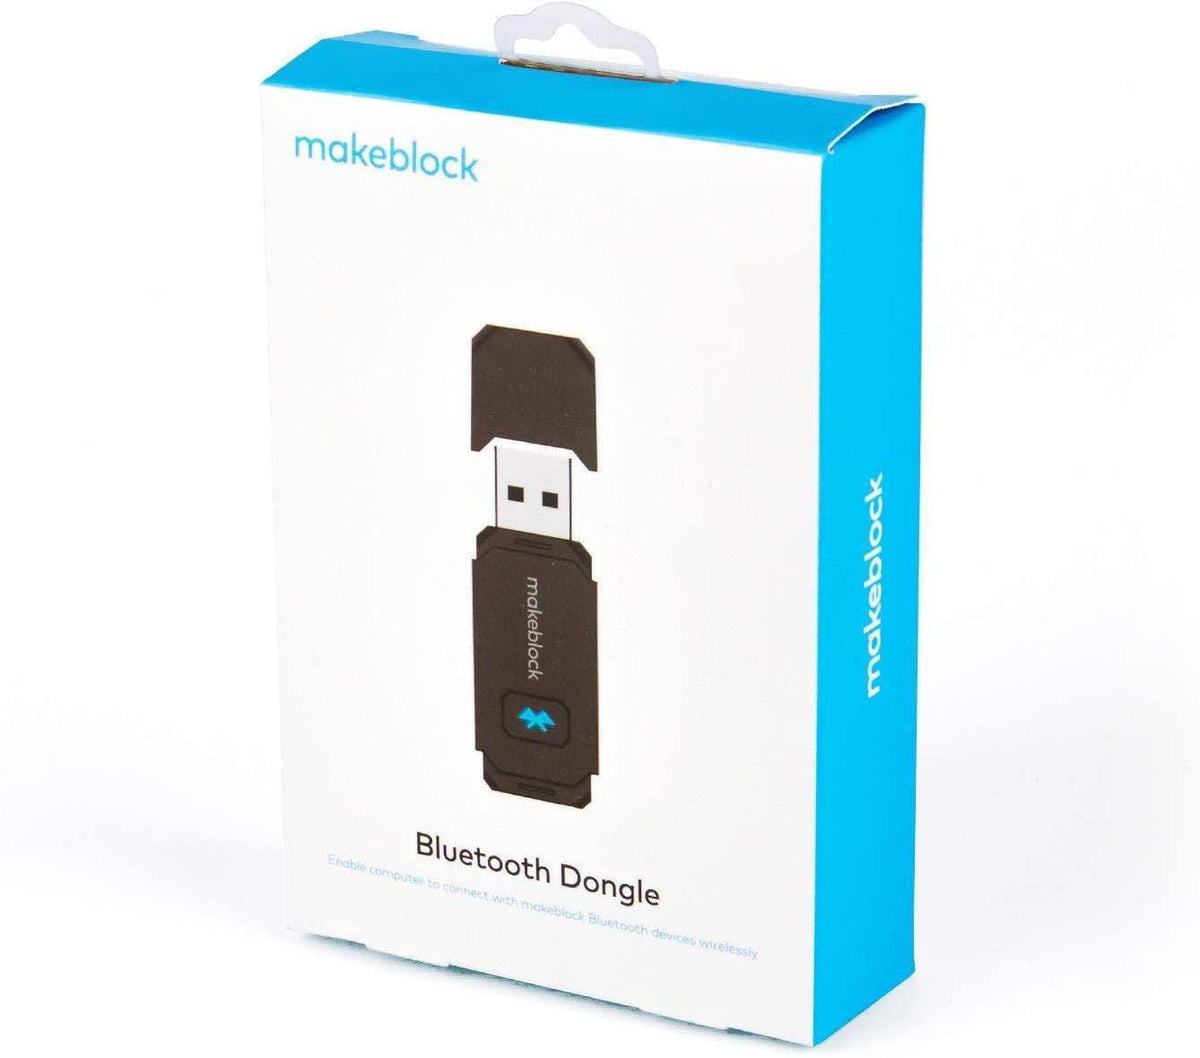 USB 2.0 Bluetooth Adapter, Bluetooth Dongle for PC Connectivity – Makeblock